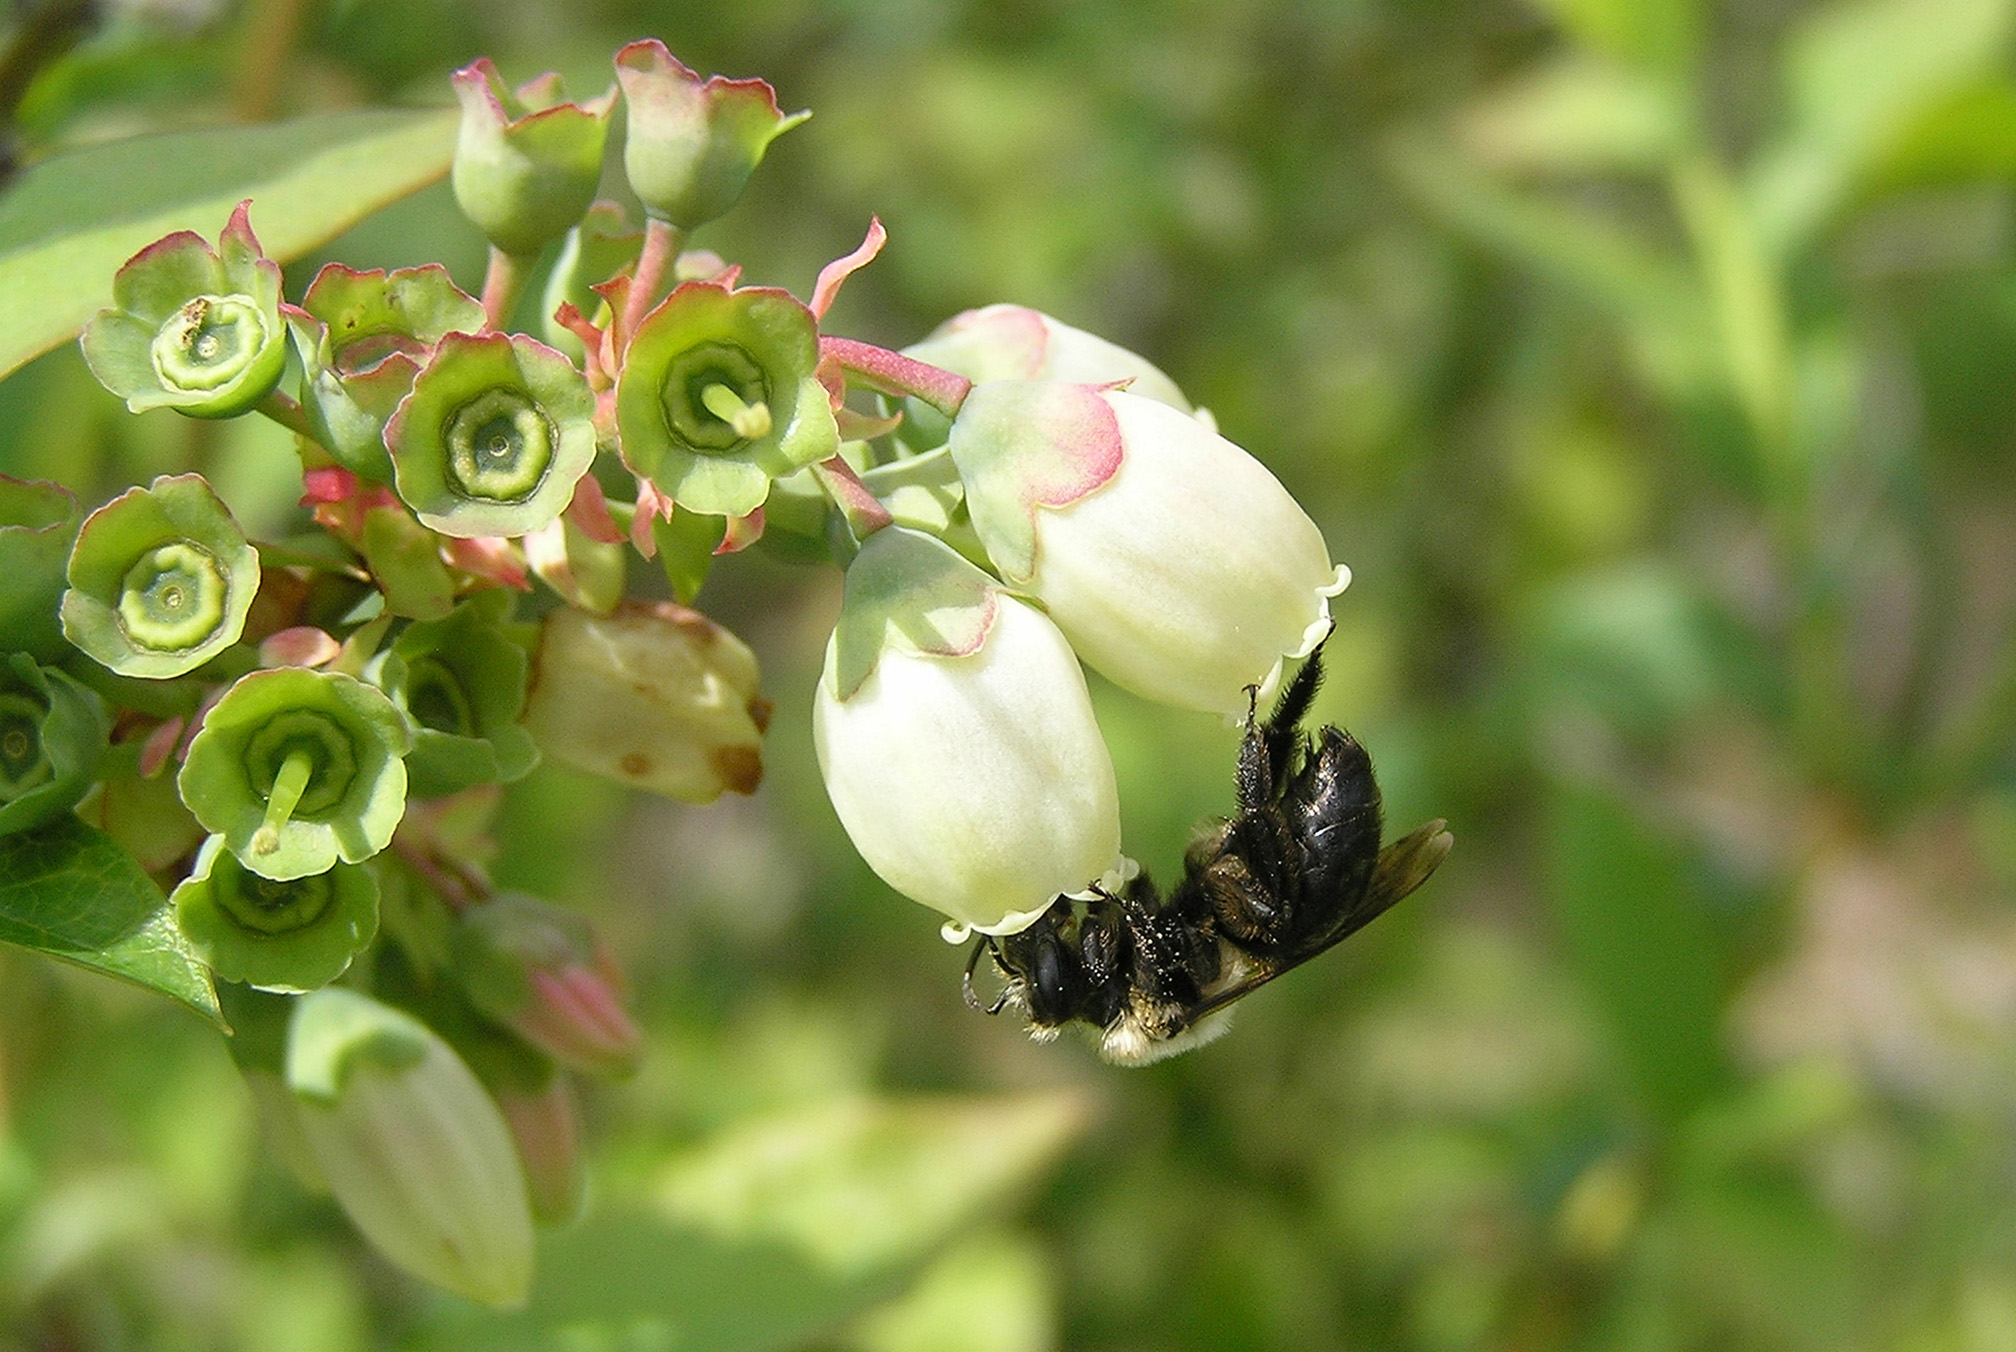 A bee foraging on blueberry flowers. The flowers are white and bell-shaped. The bee is black with pale brown hair on the font part of it's body. It is upside down, hanging from the opening of the flowers.